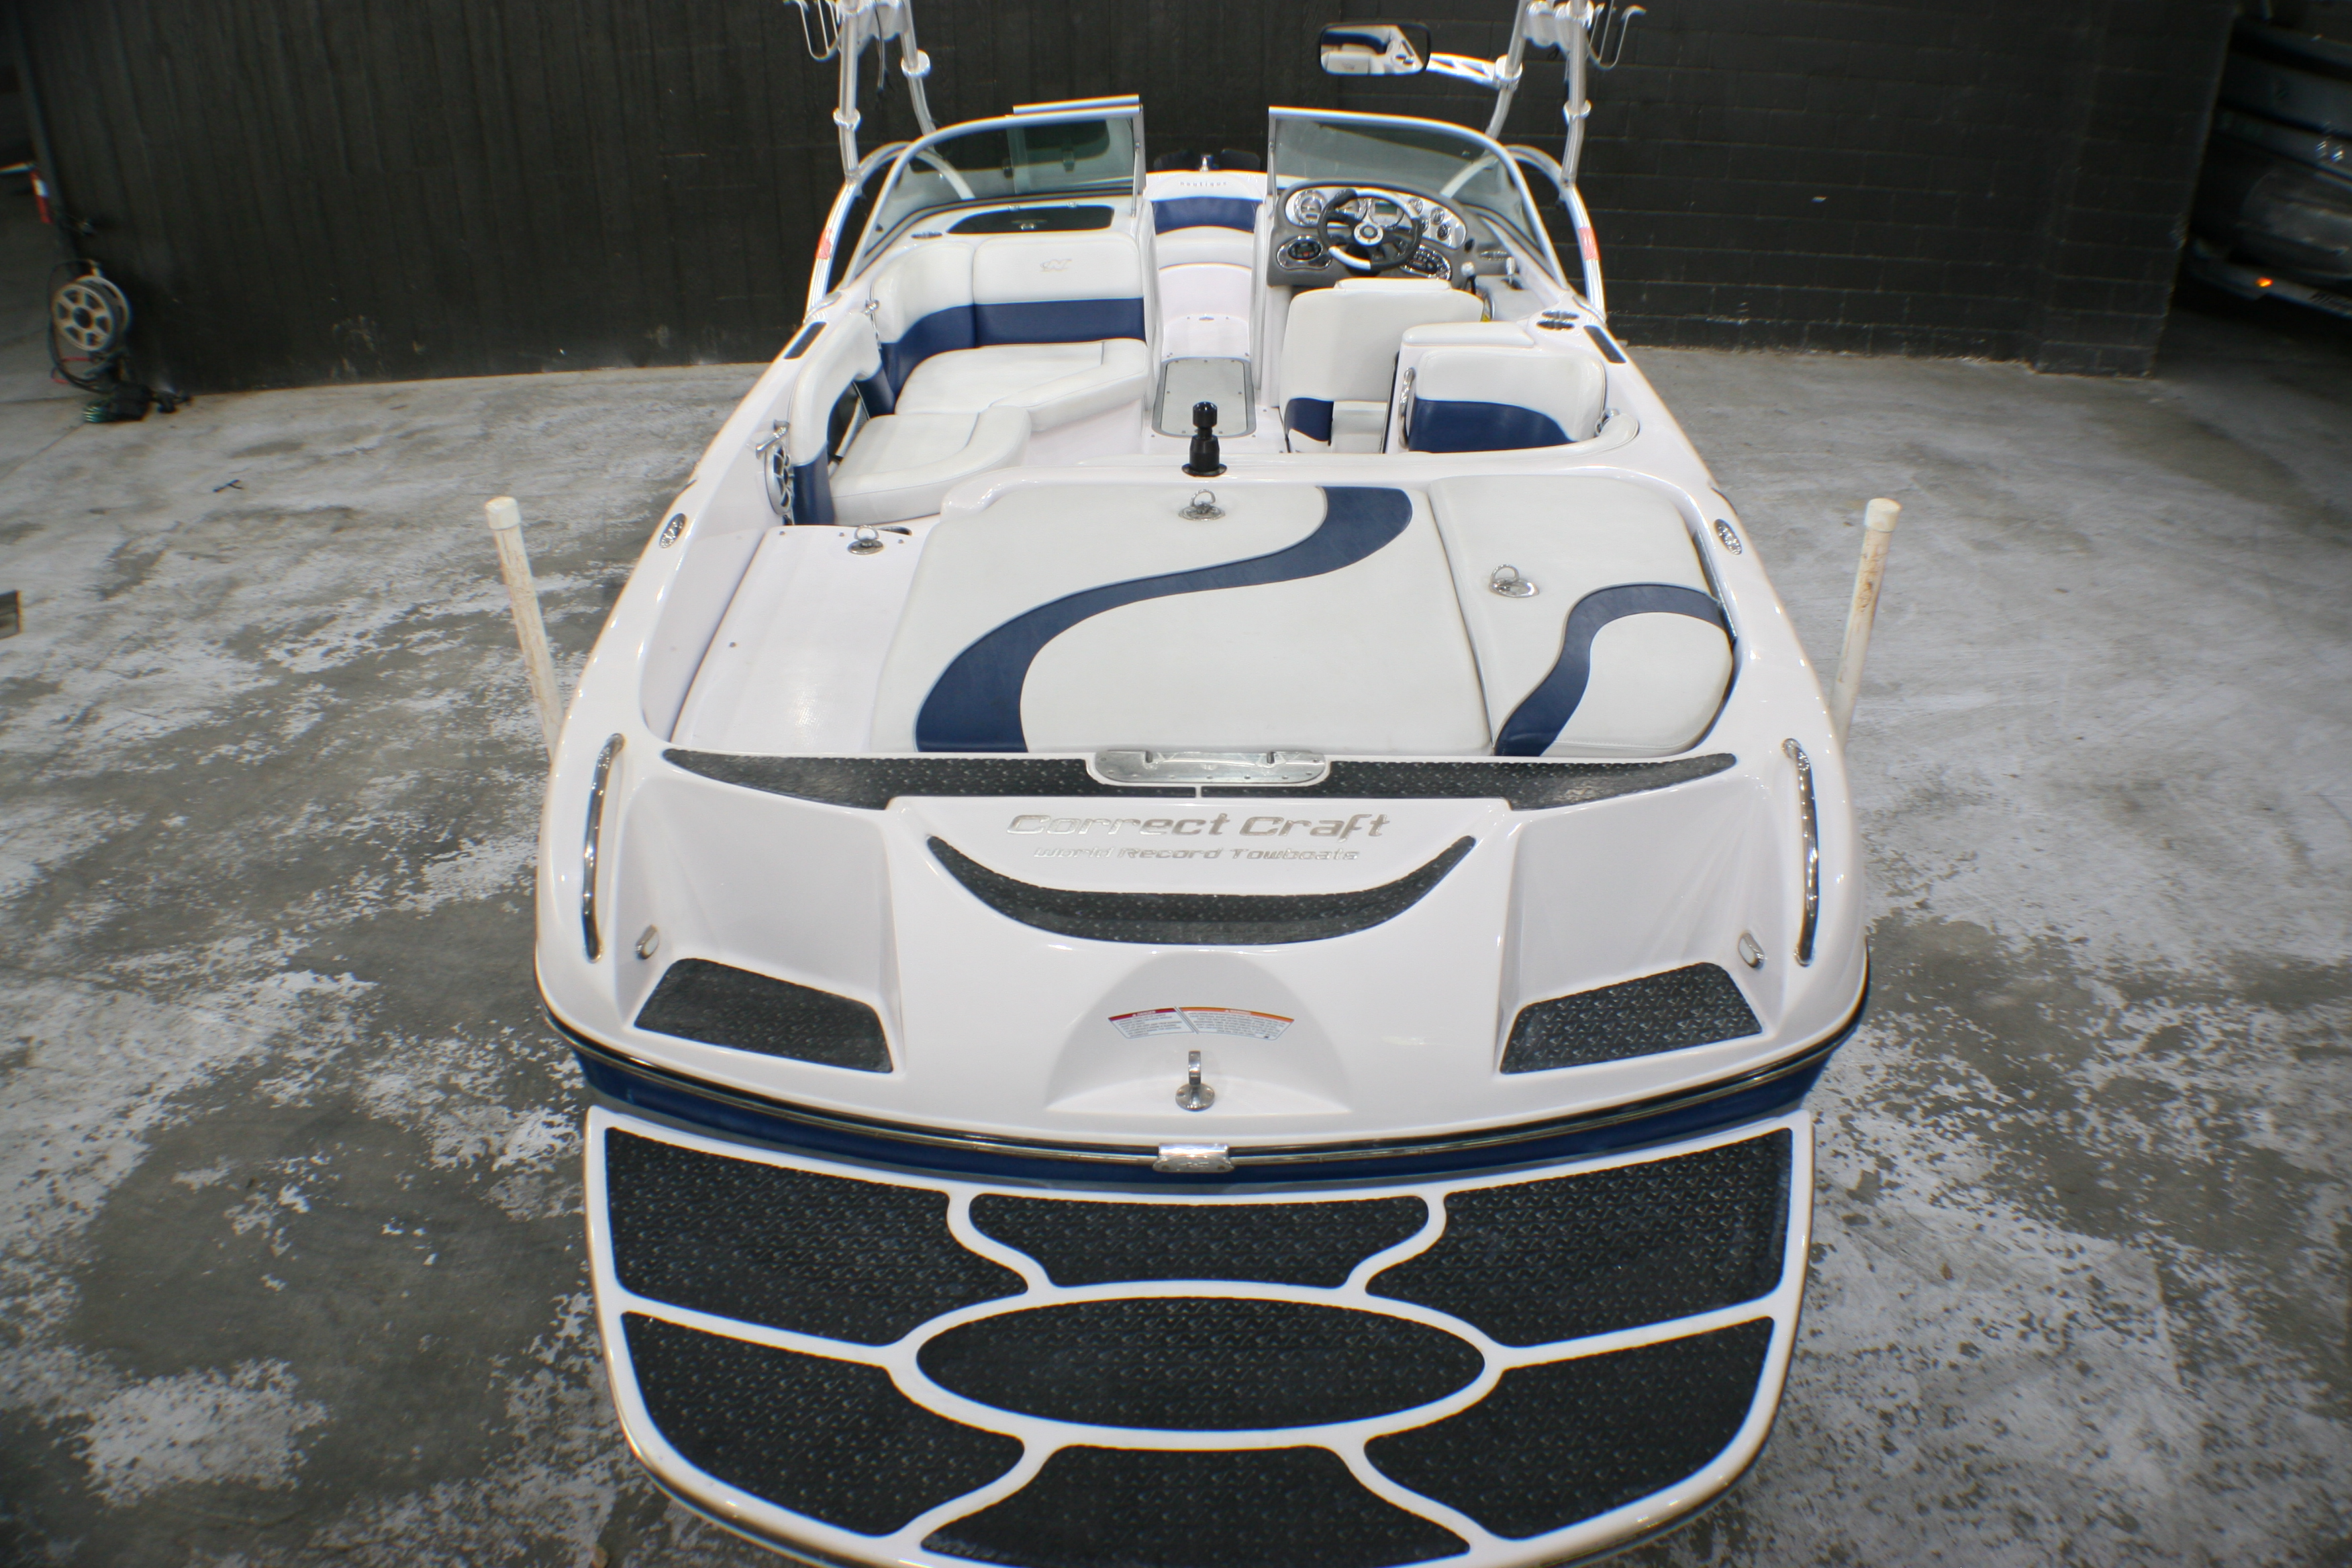 2006 Correct craft SV211TE Power boat for sale in McQueeney, TX - image 9 